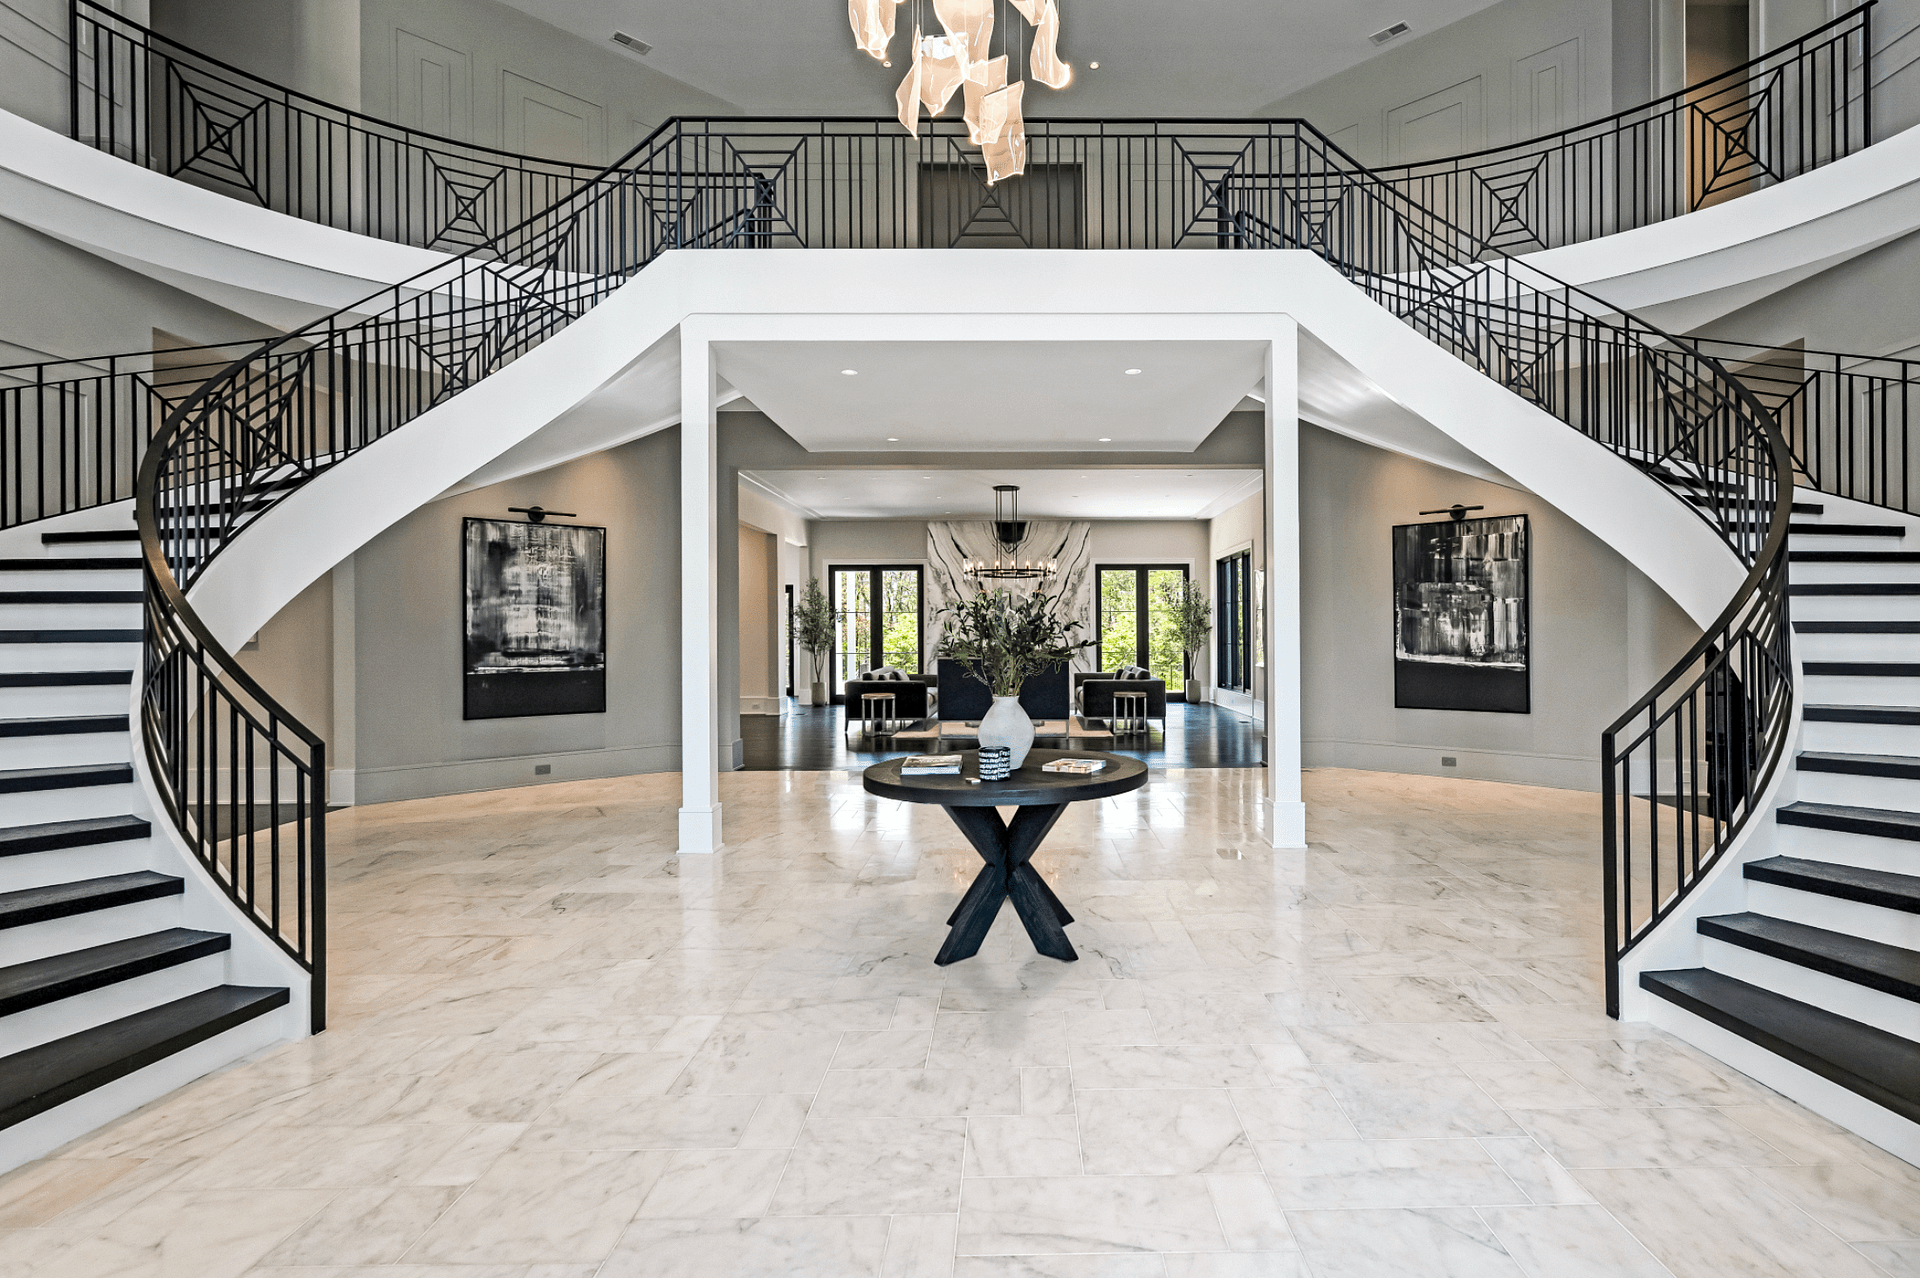 $16 Million New Build In Franklin, Tennessee (PHOTOS)